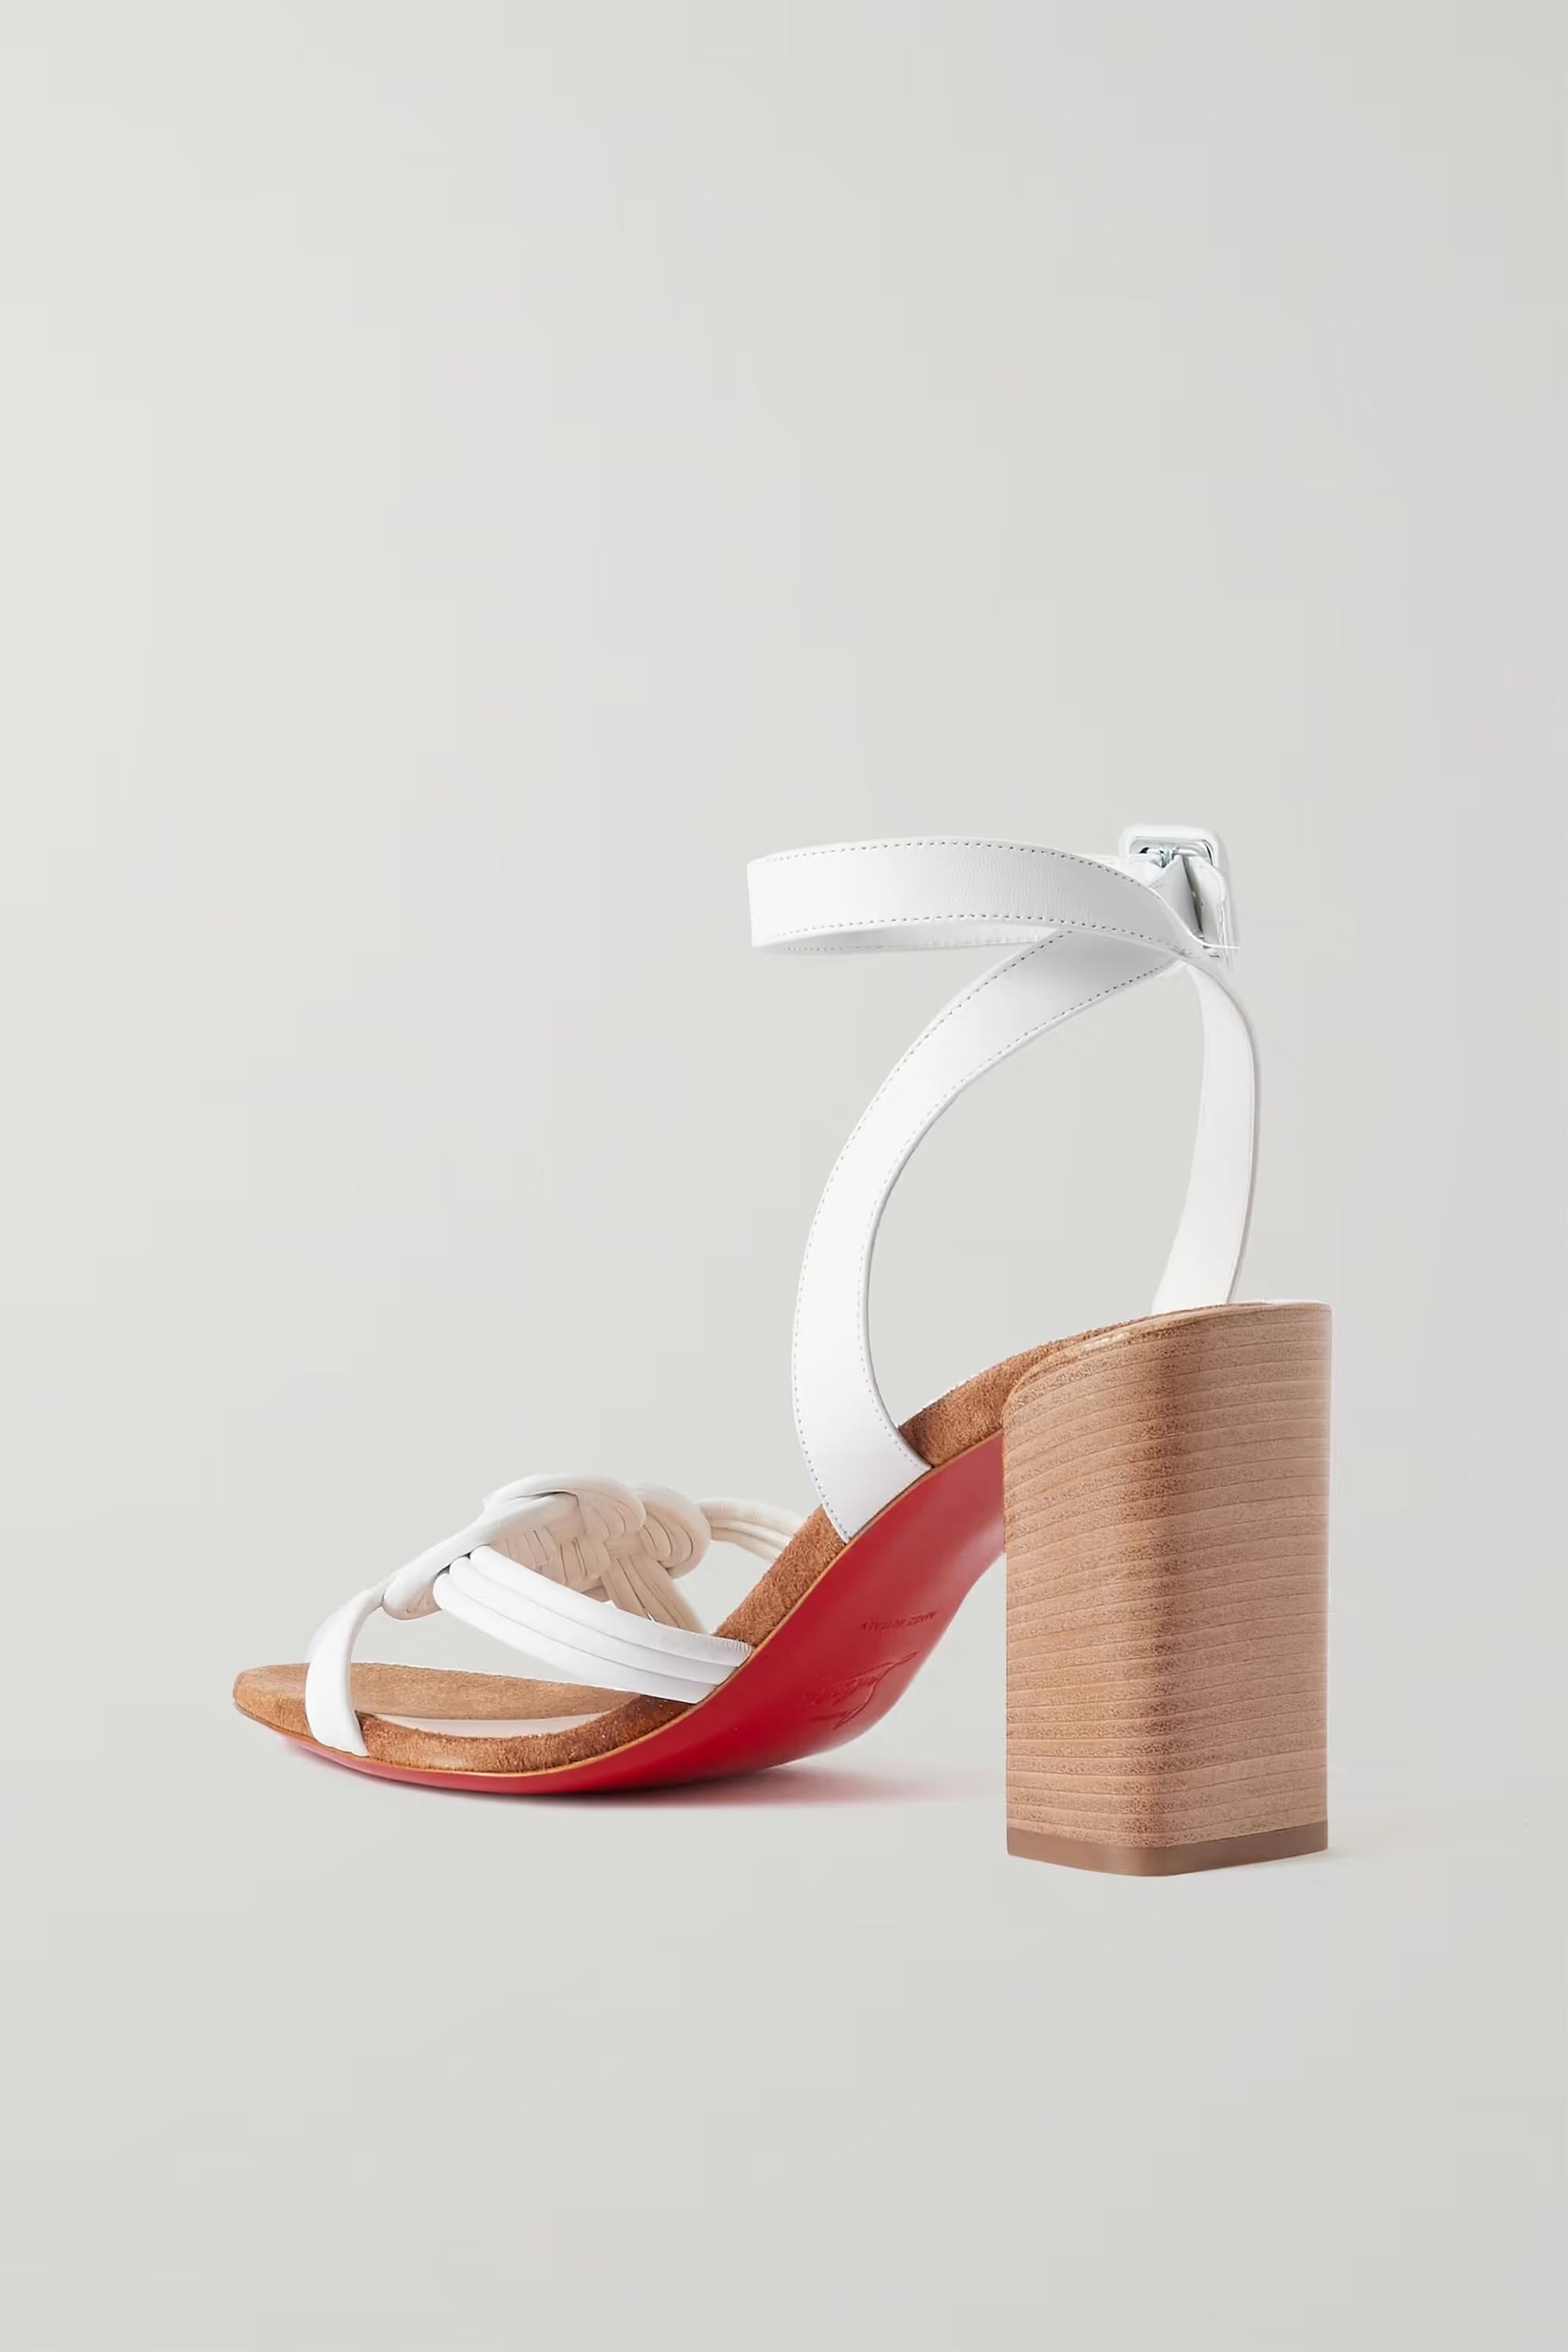 Christian Louboutin Ella 85 White Nappa Sandals Sz 37.5 NWT In New Condition For Sale In Paradise Island, BS